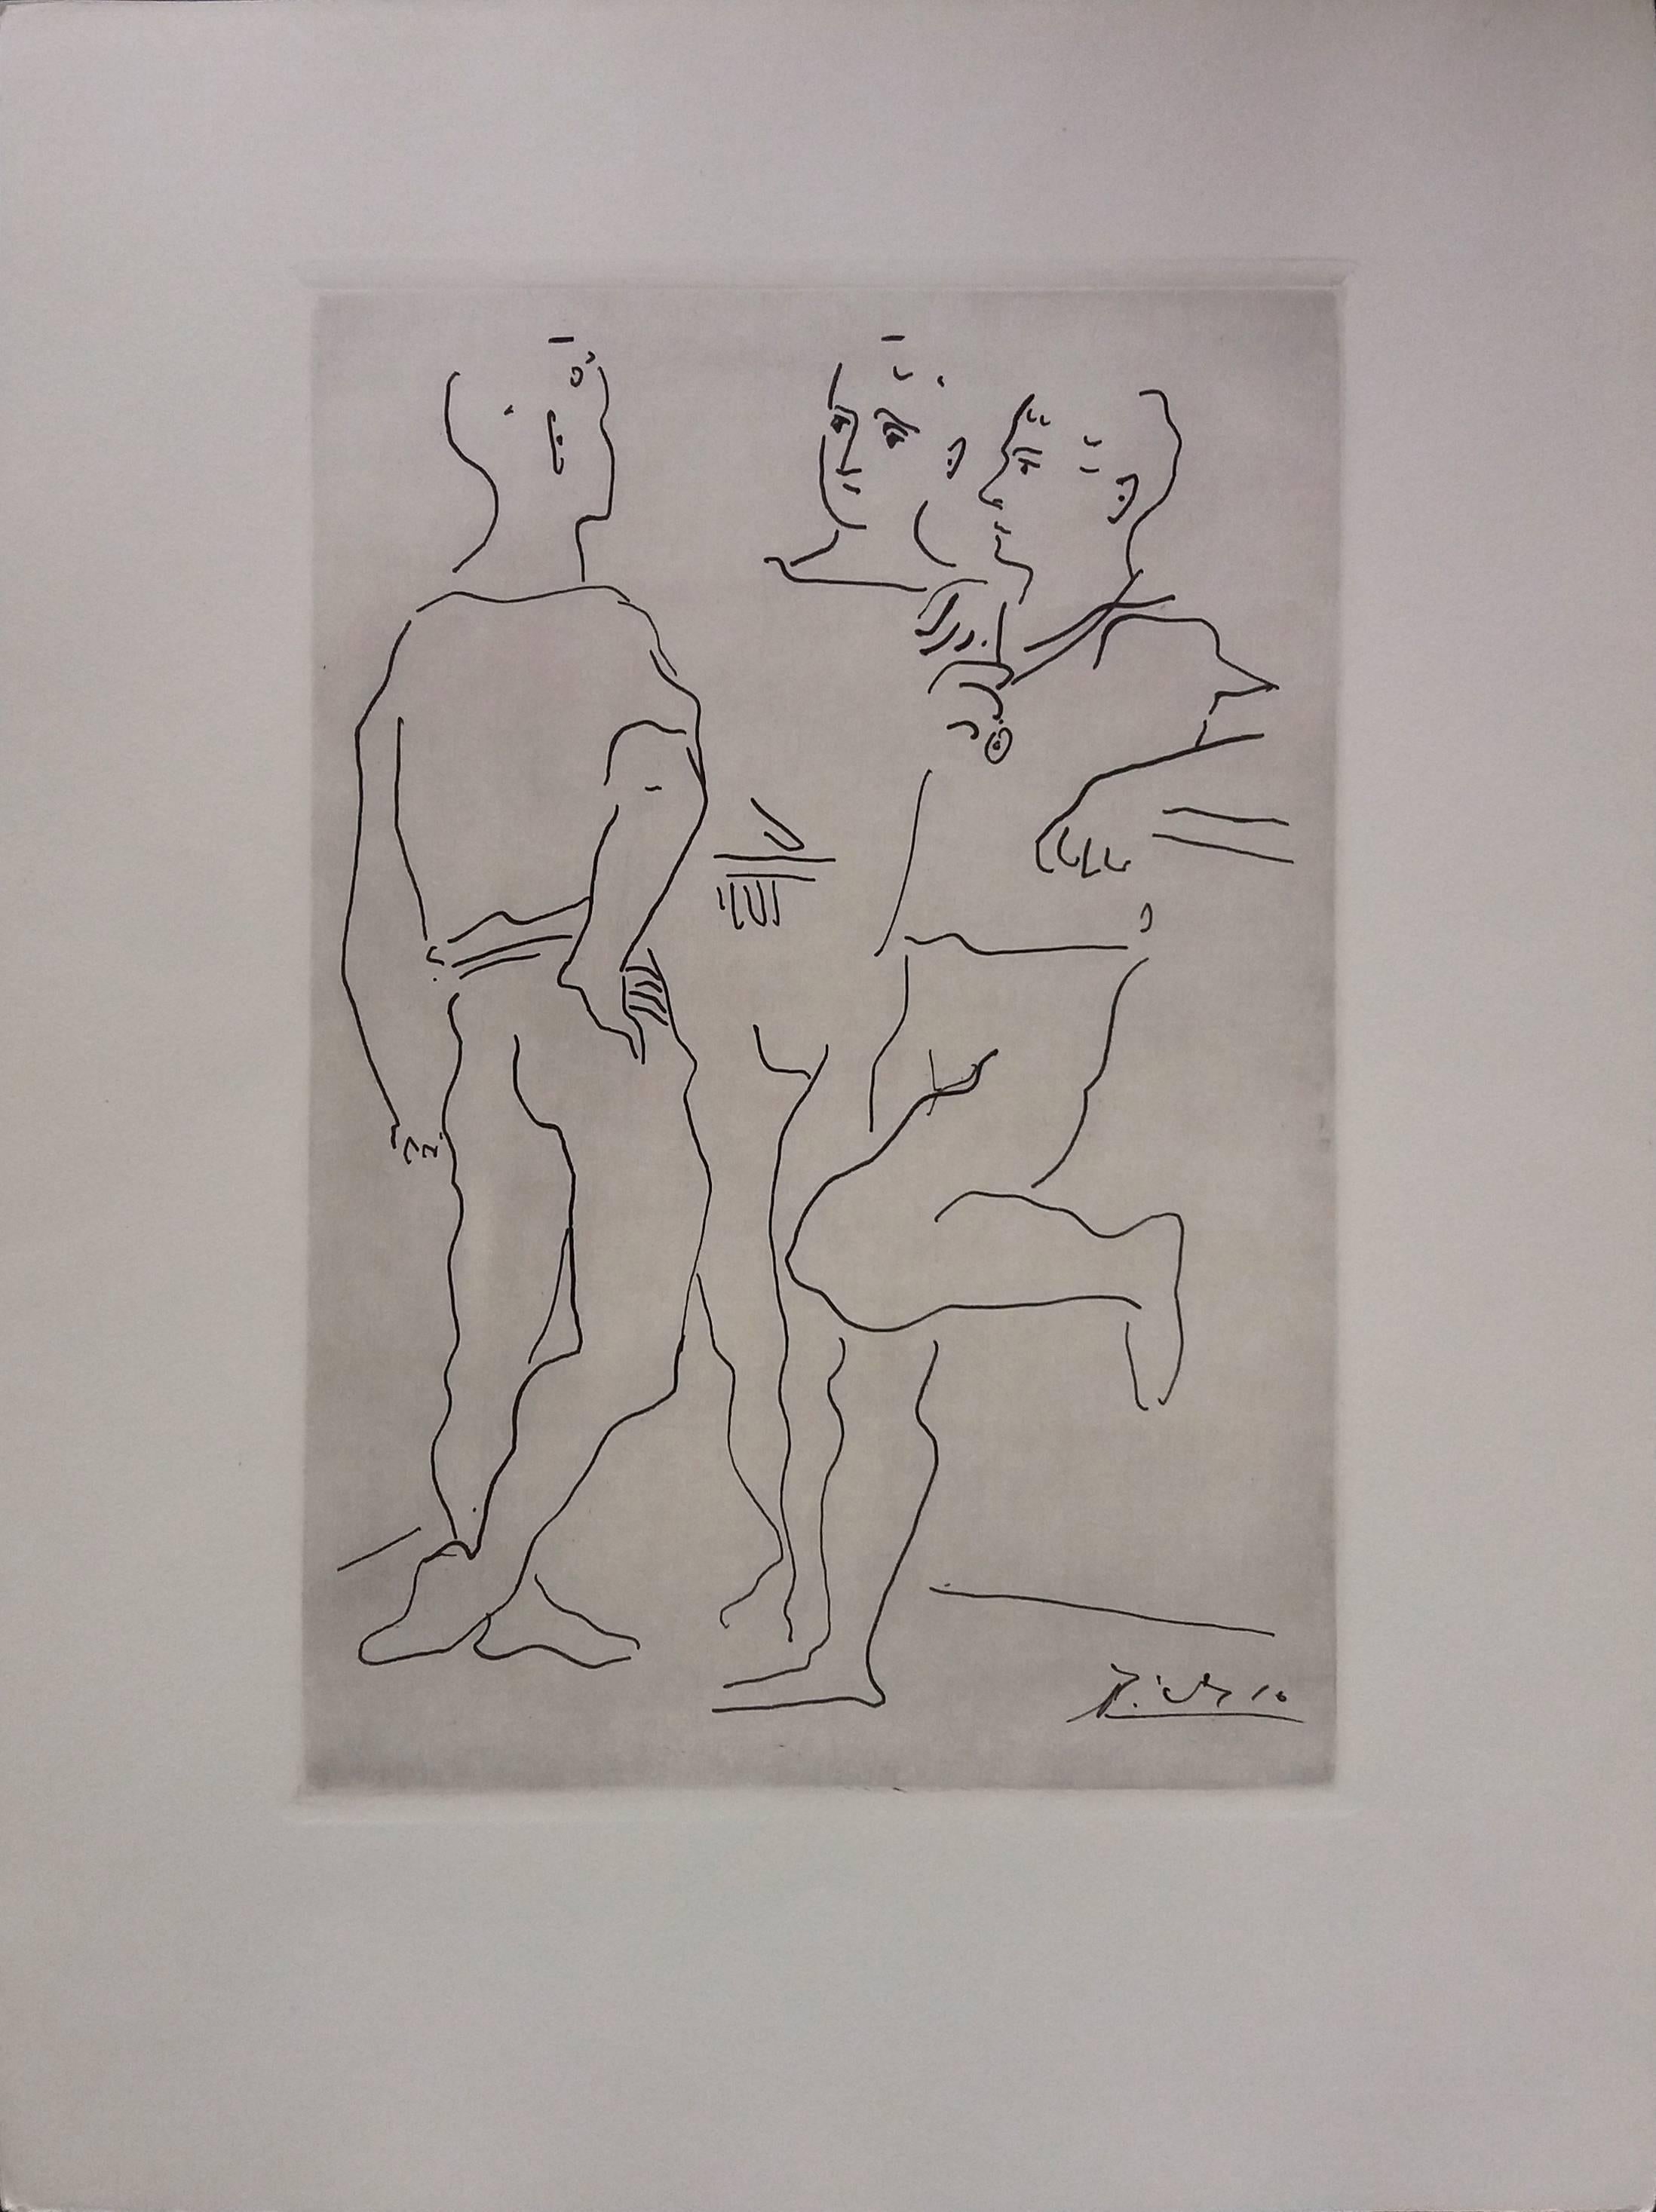 (after) Pablo Picasso Figurative Print - Pablo Picasso original drawing engraved on copper 3/8 (1943) 